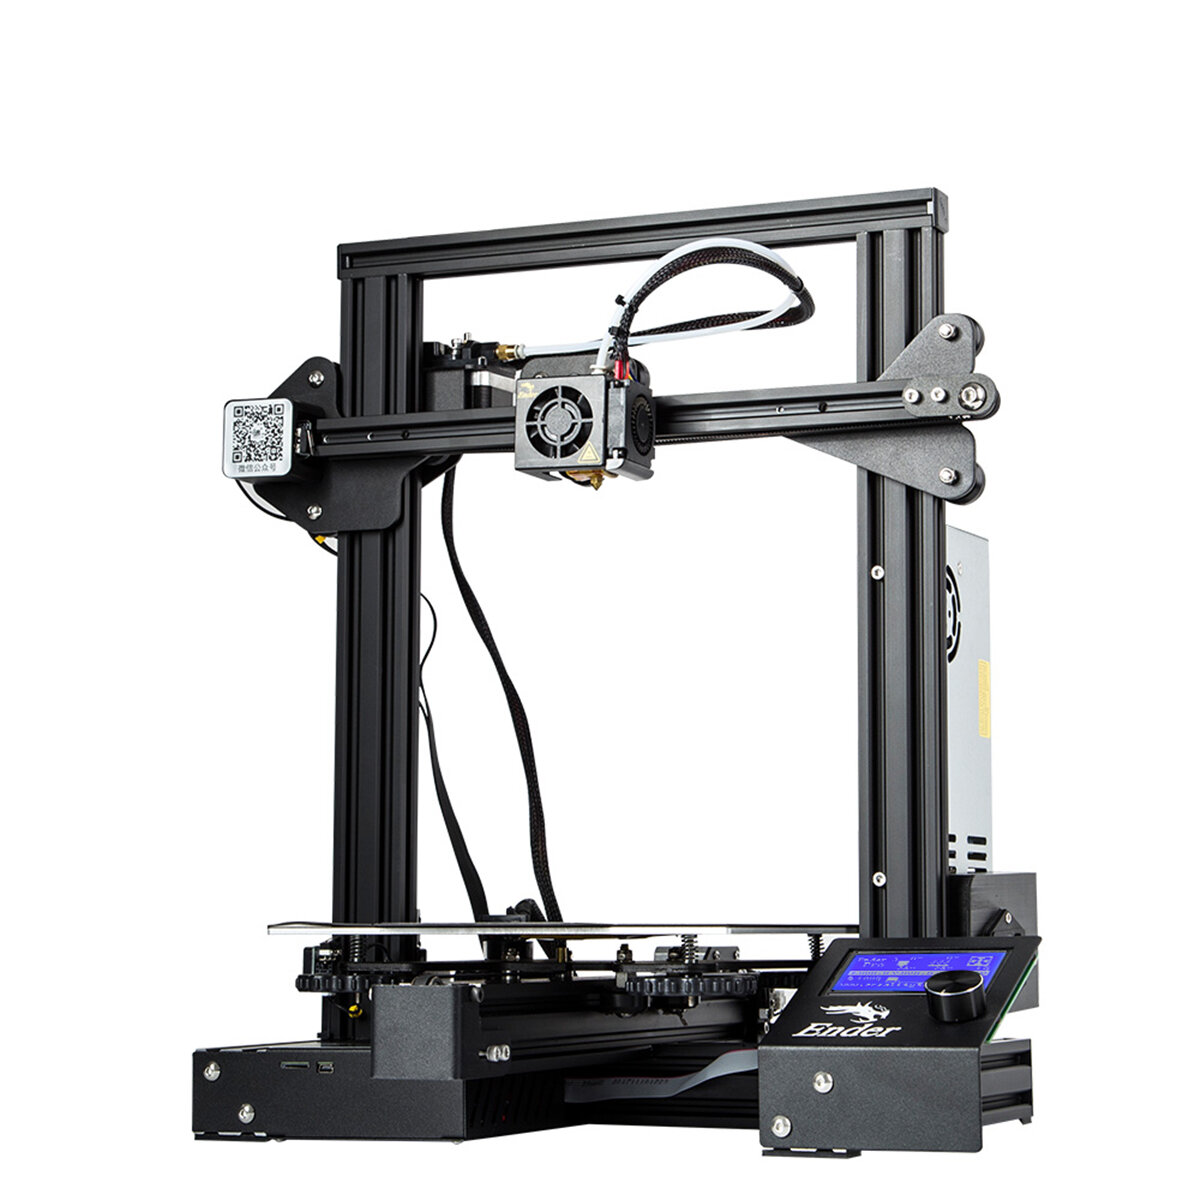 Image of Creality 3D® Ender-3 Pro DIY 3D Printer Kit 220x220x250mm Printing Size With Magnetic Removable Platform Sticker